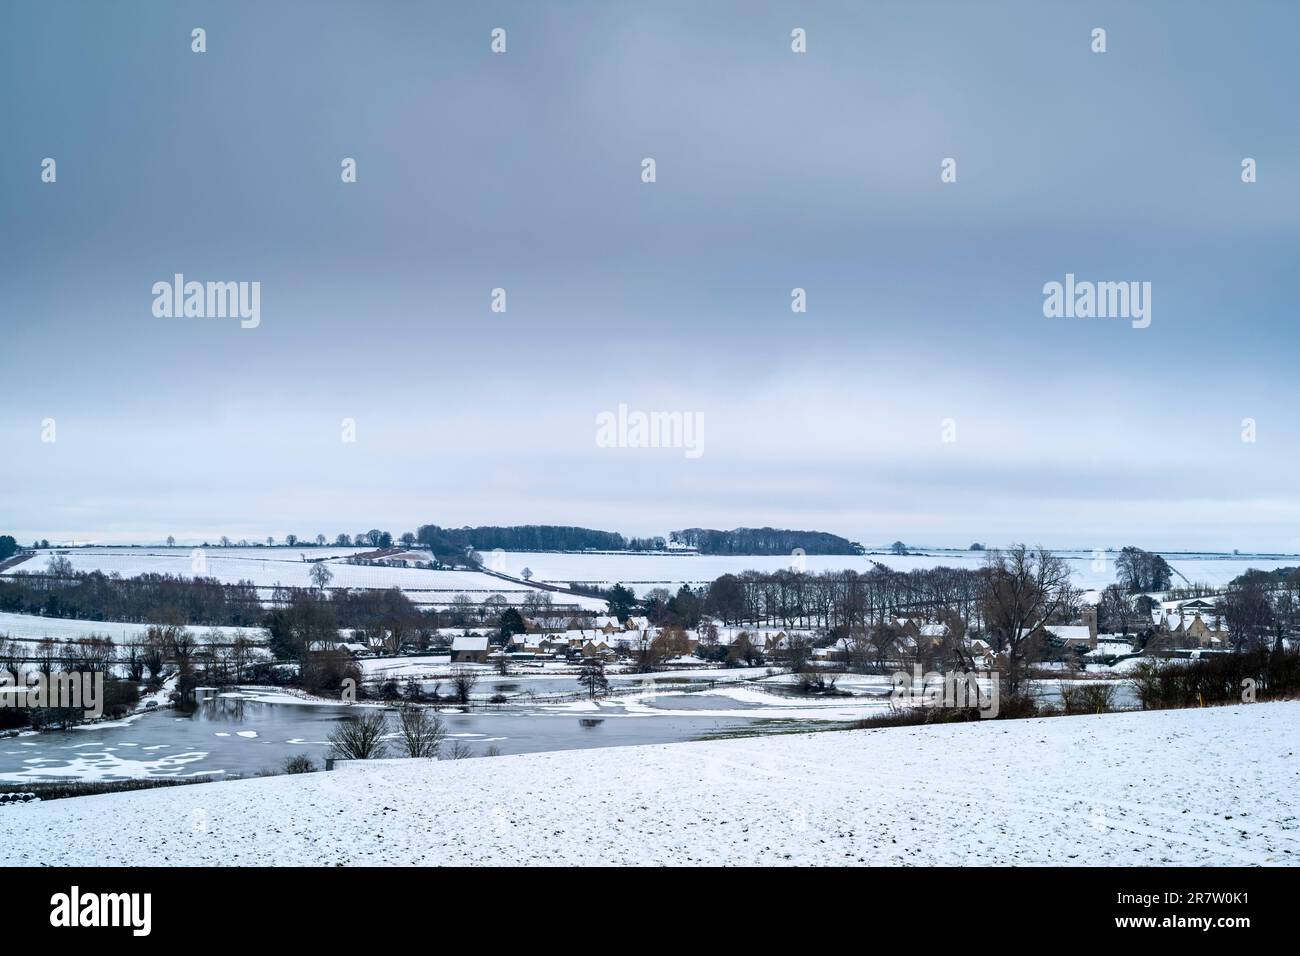 Picturesque snow-covered field and wintry scene at Asthall village in The Cotswolds, Oxfordshire Stock Photo